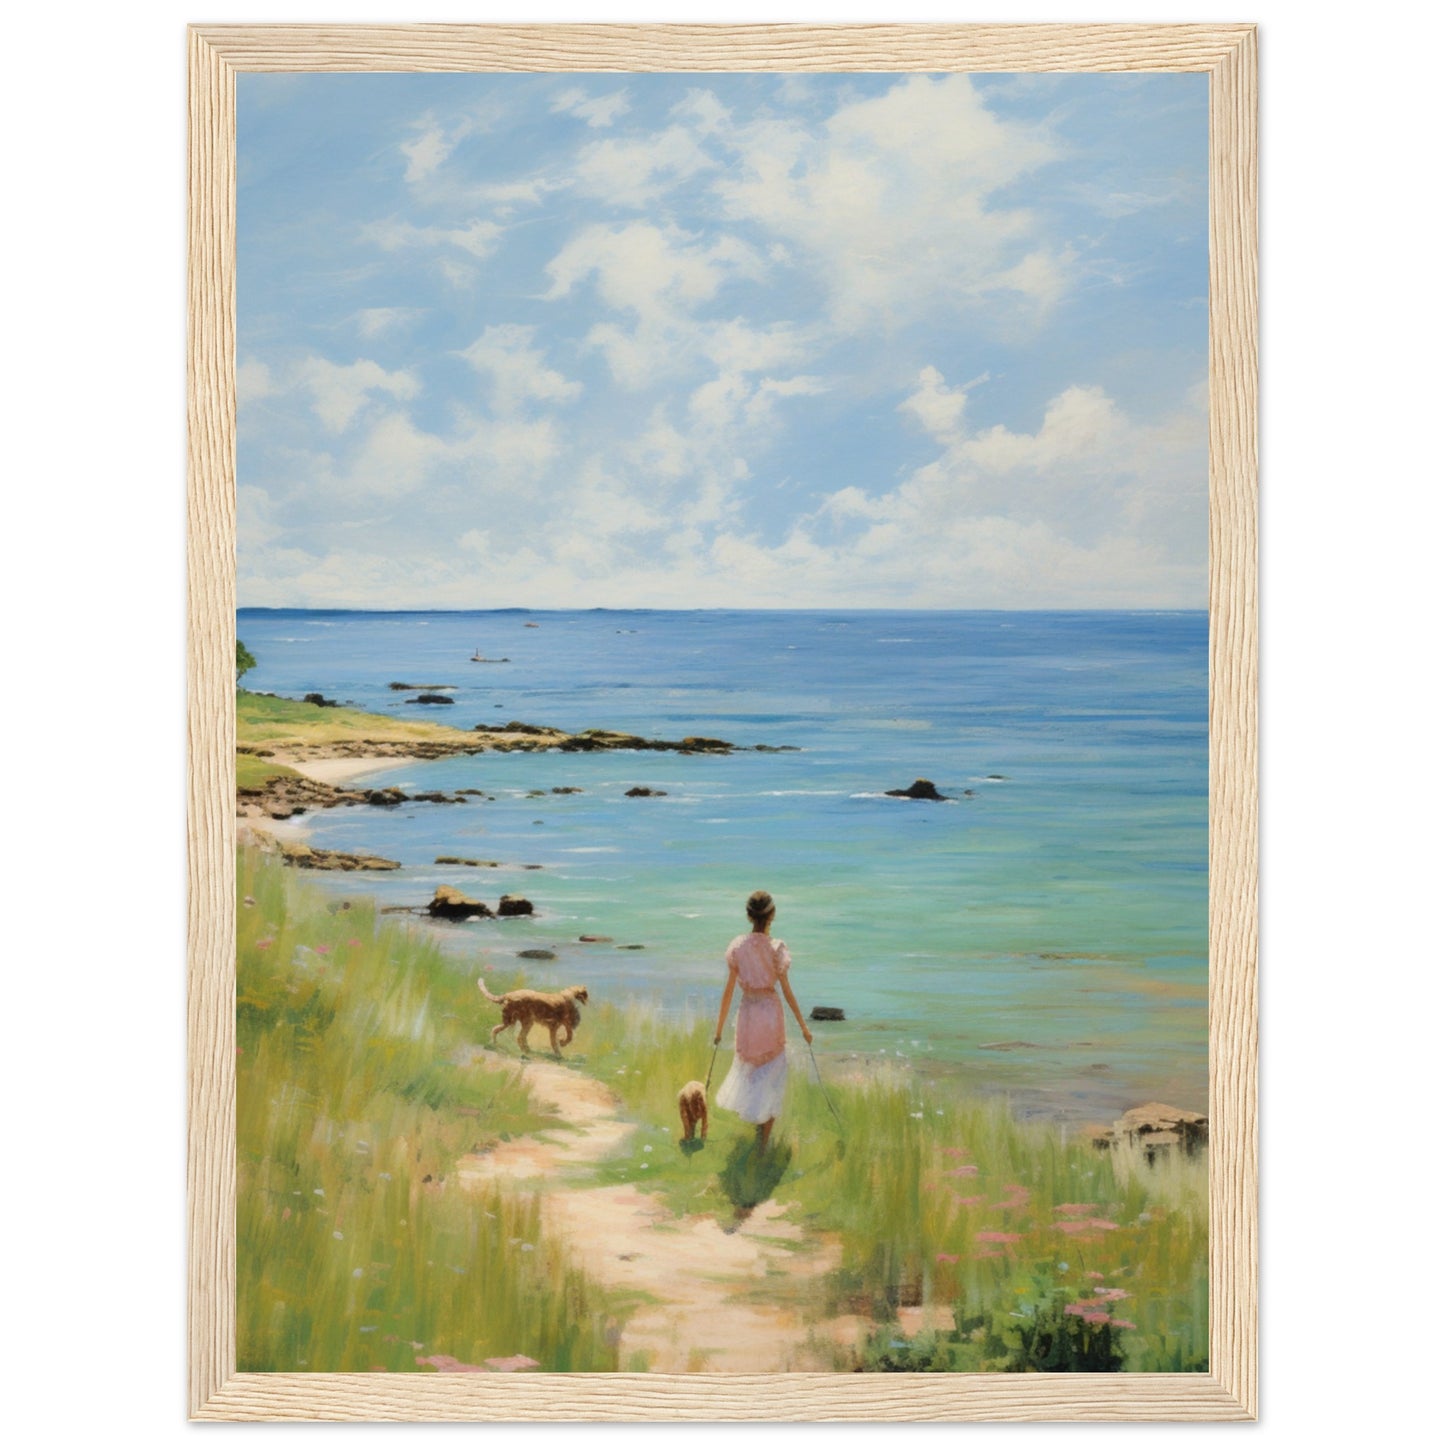 Museum-Quality Matte Paper Wooden Framed Poster